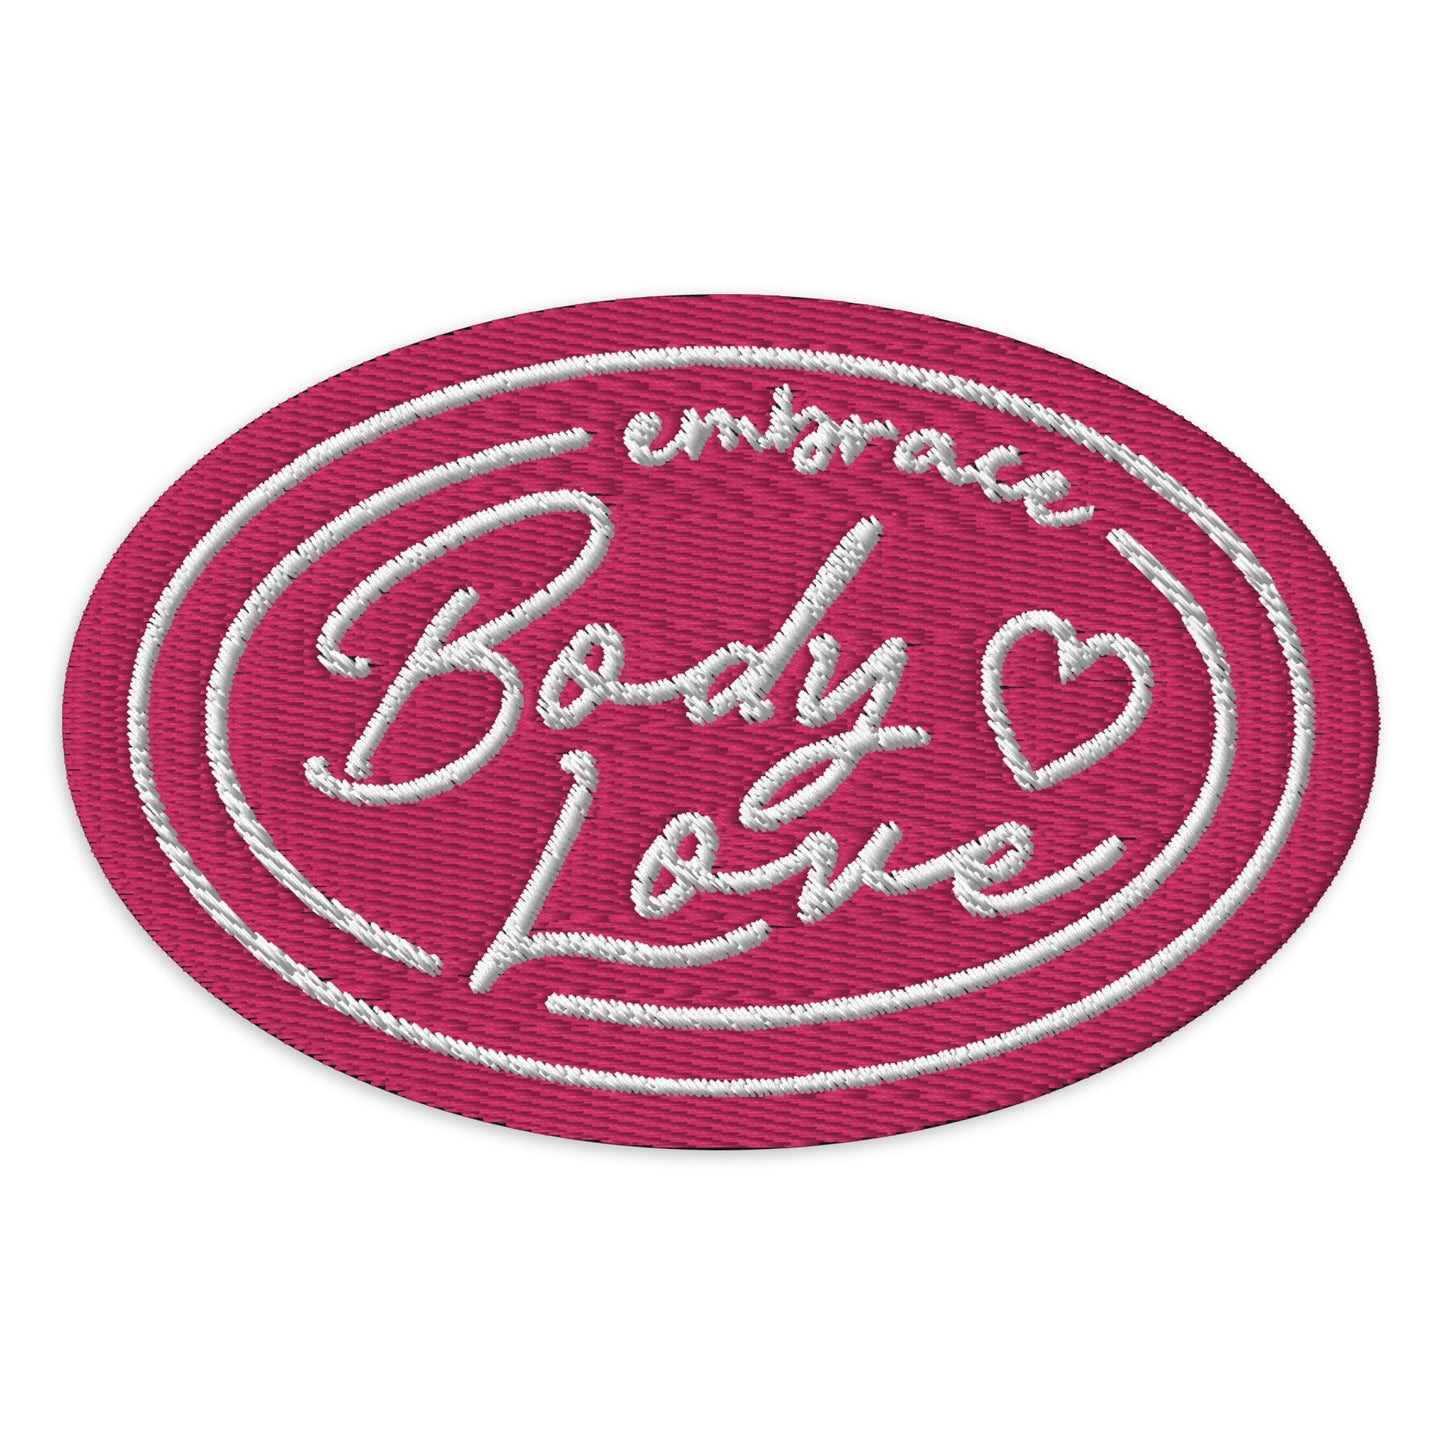 Embrace Body Love Logo, Embroidered Patch- Pink/White Logo